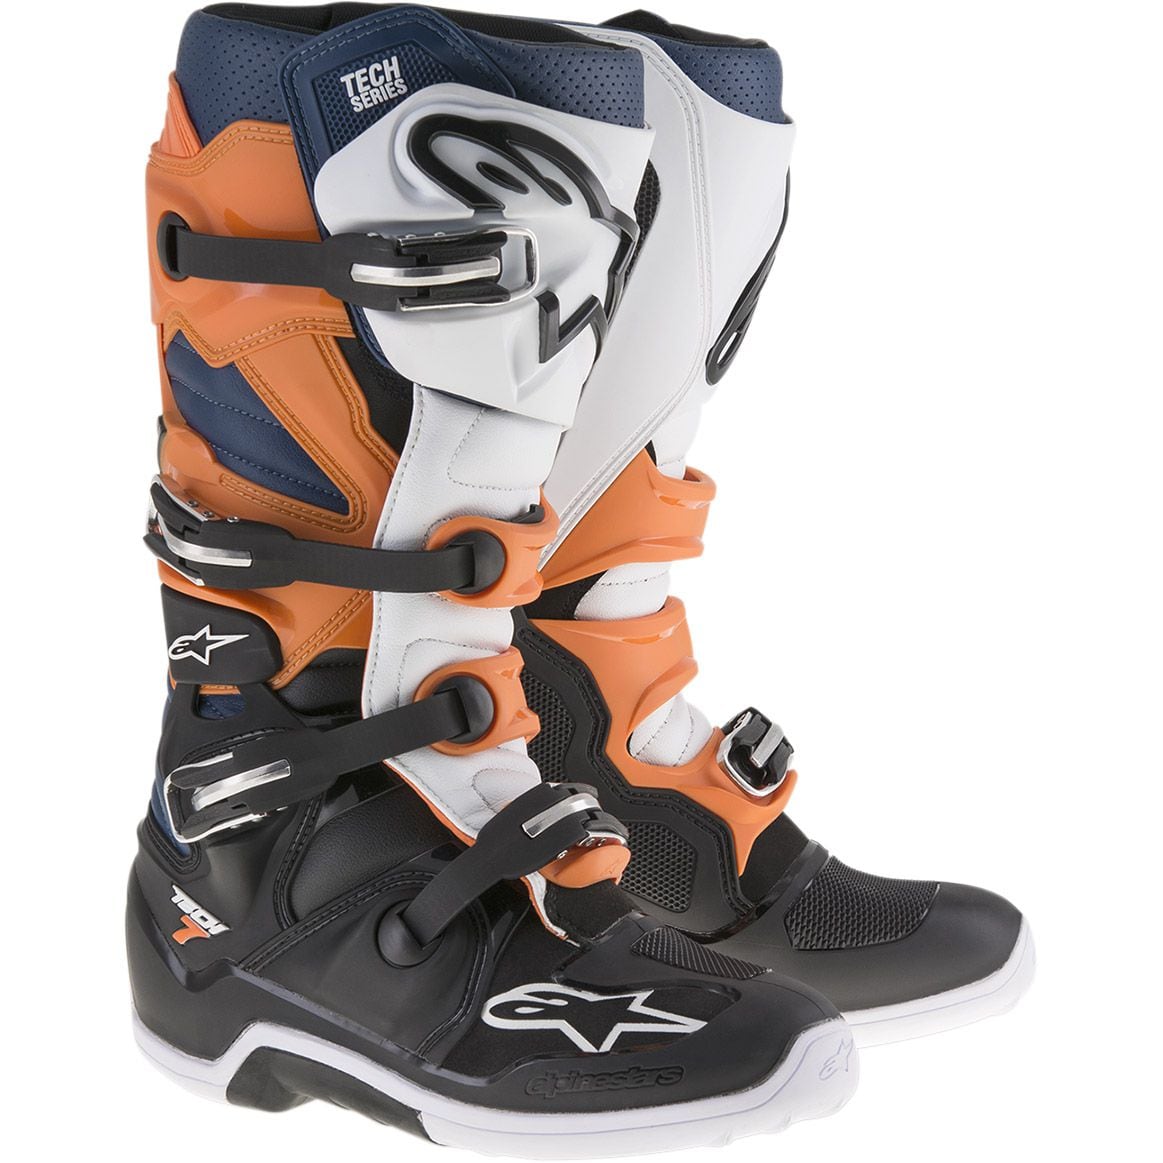 With a broad range of colorways to choose from, the Alpinestars Tech 7 boots will look good on just about any off-road rider.